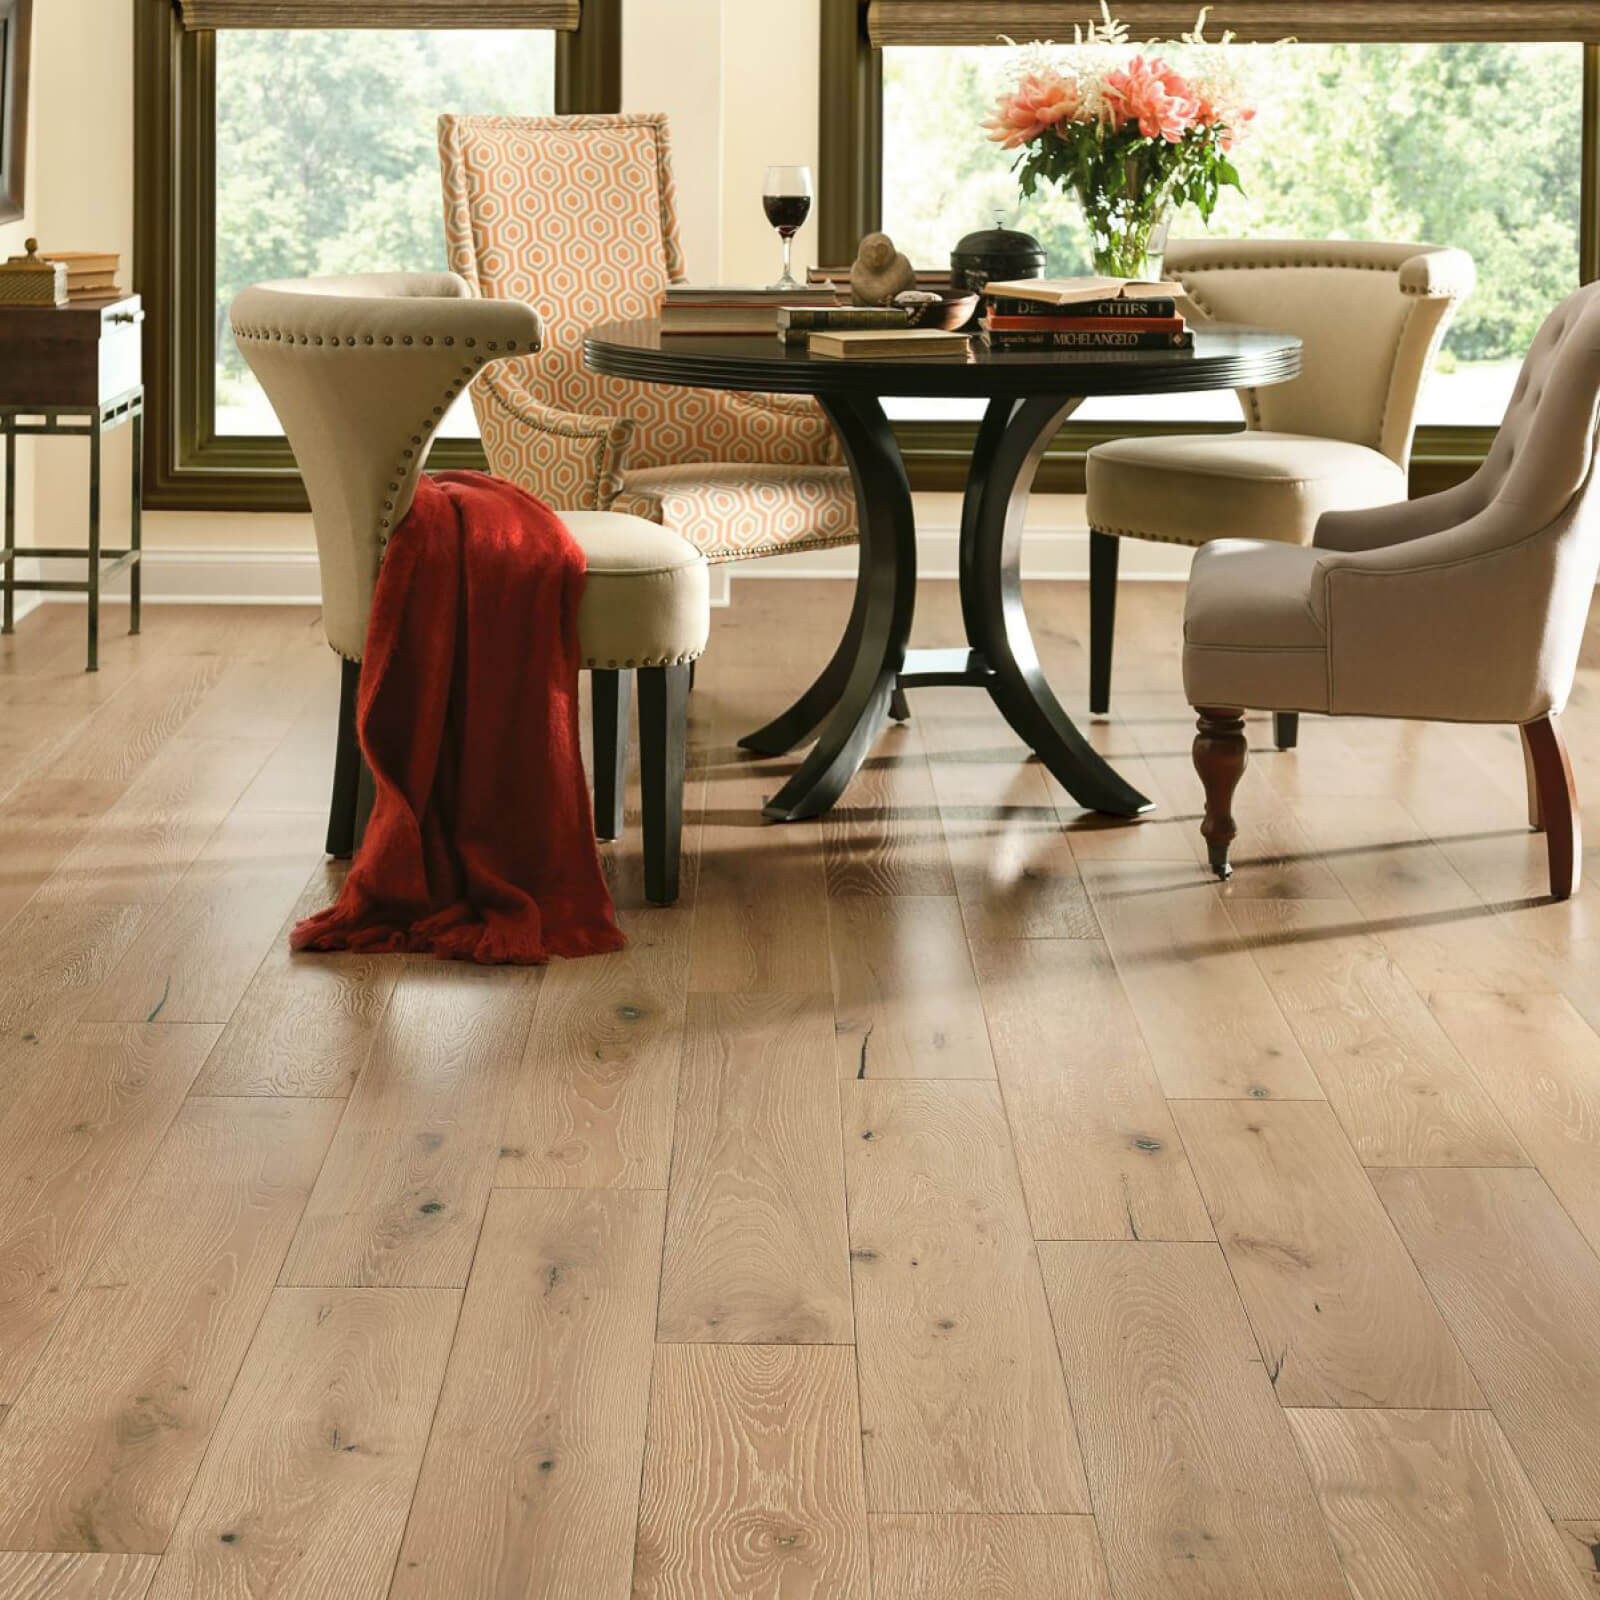 What You Need to Know About Replacing Carpet With Hardwood